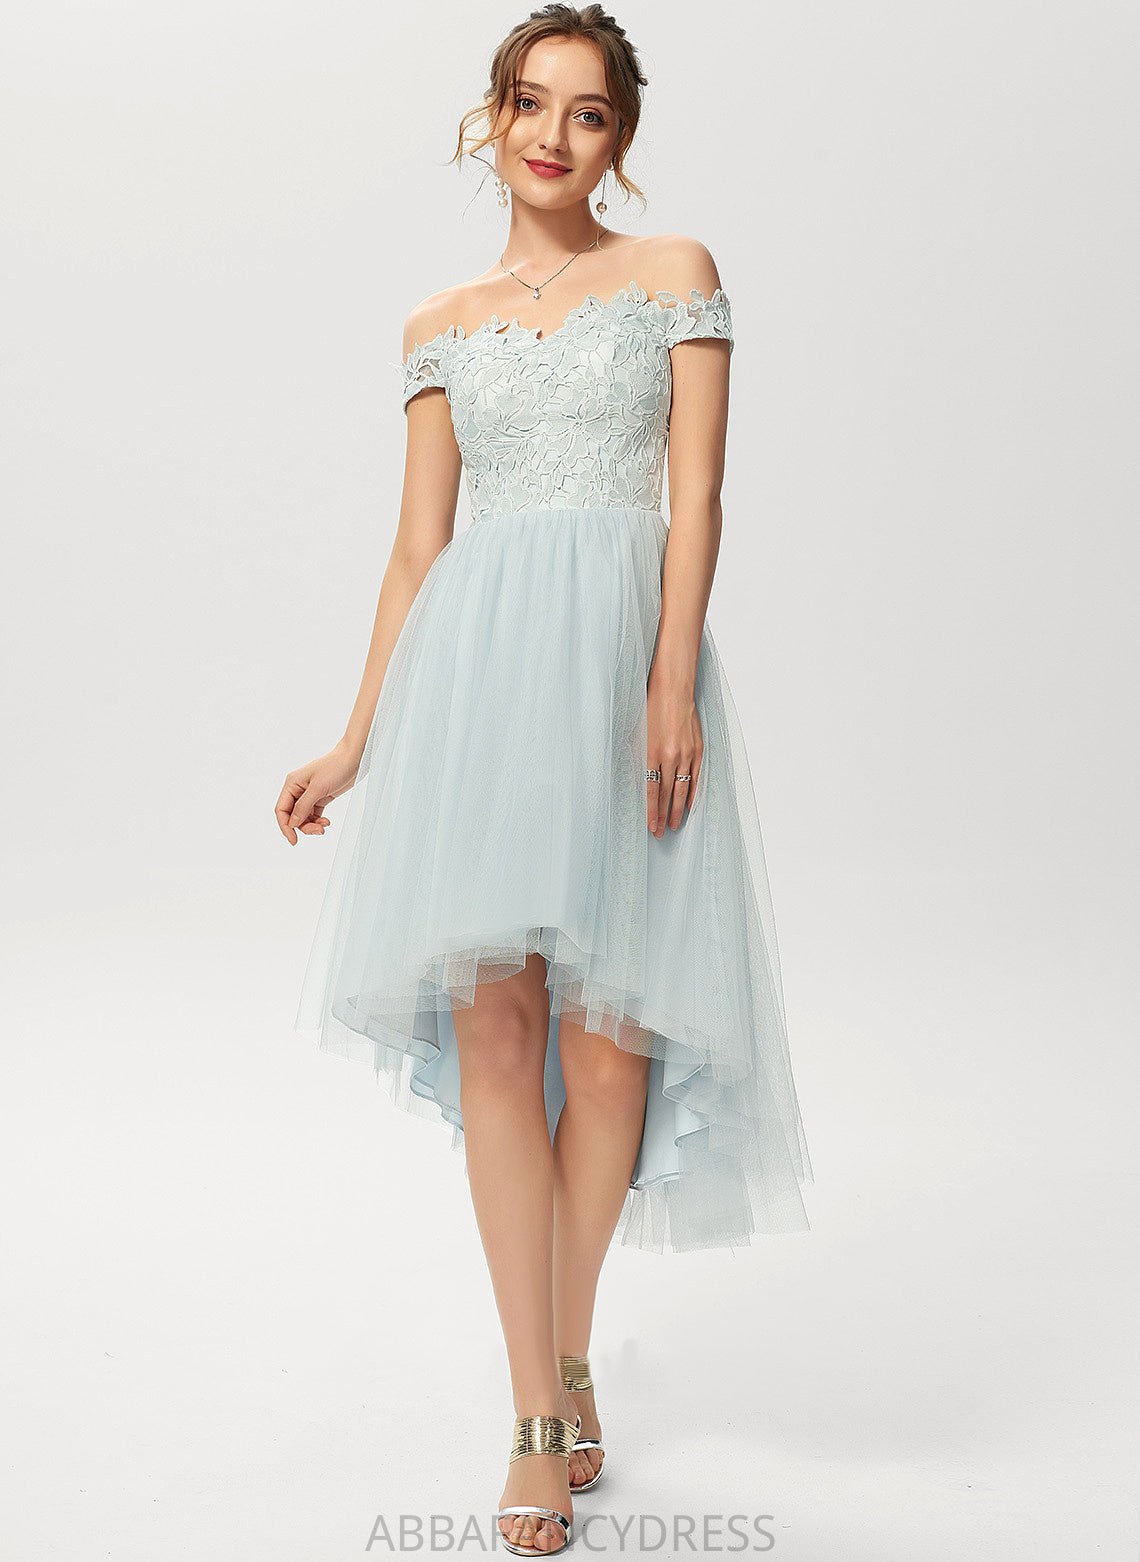 Lace Cocktail Dresses Off-the-Shoulder A-Line Dress Asymmetrical Sherlyn Tulle Cocktail